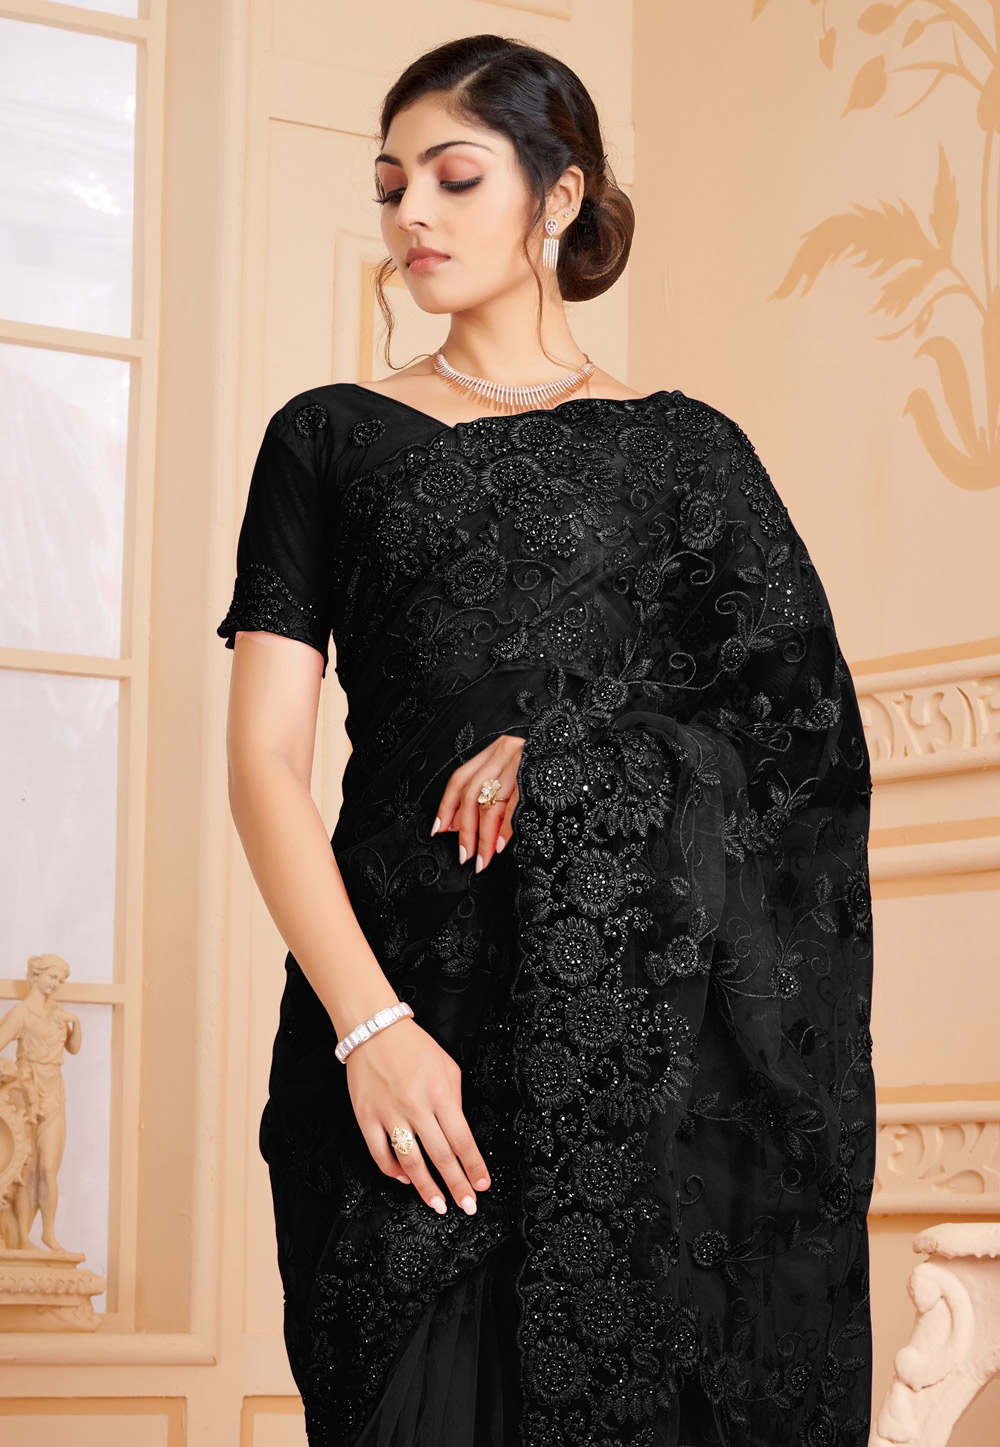 https://resources.indianclothstore.com/resources/productimages/156106122022-Black-Net-Saree-With-Blouse-1.jpg